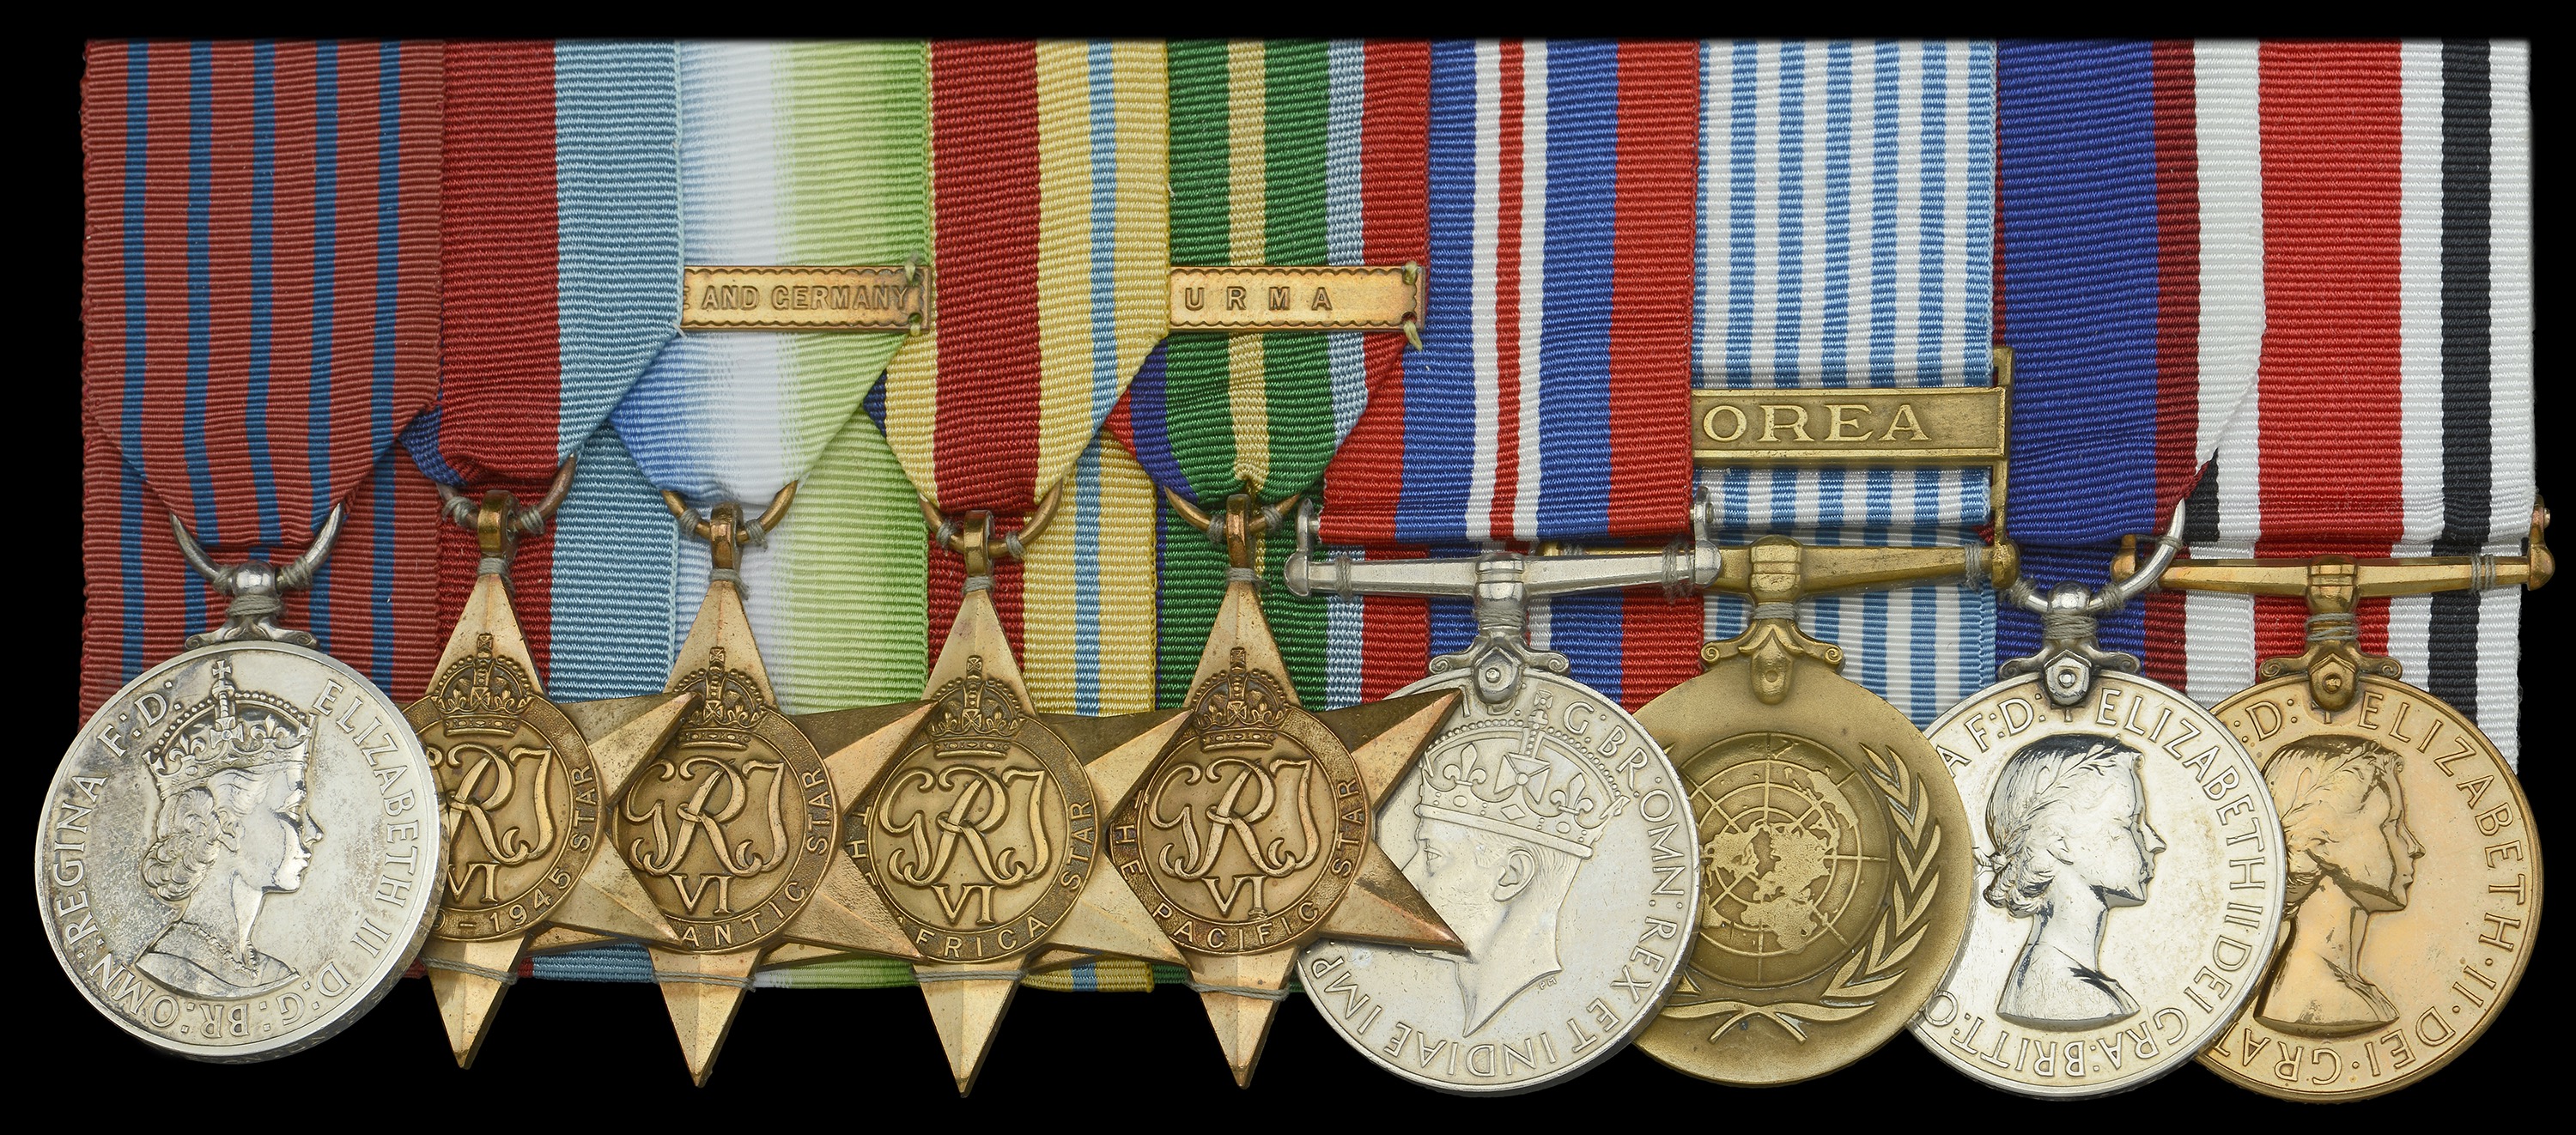 Medals from the Collection of David Lloyd, Part 1